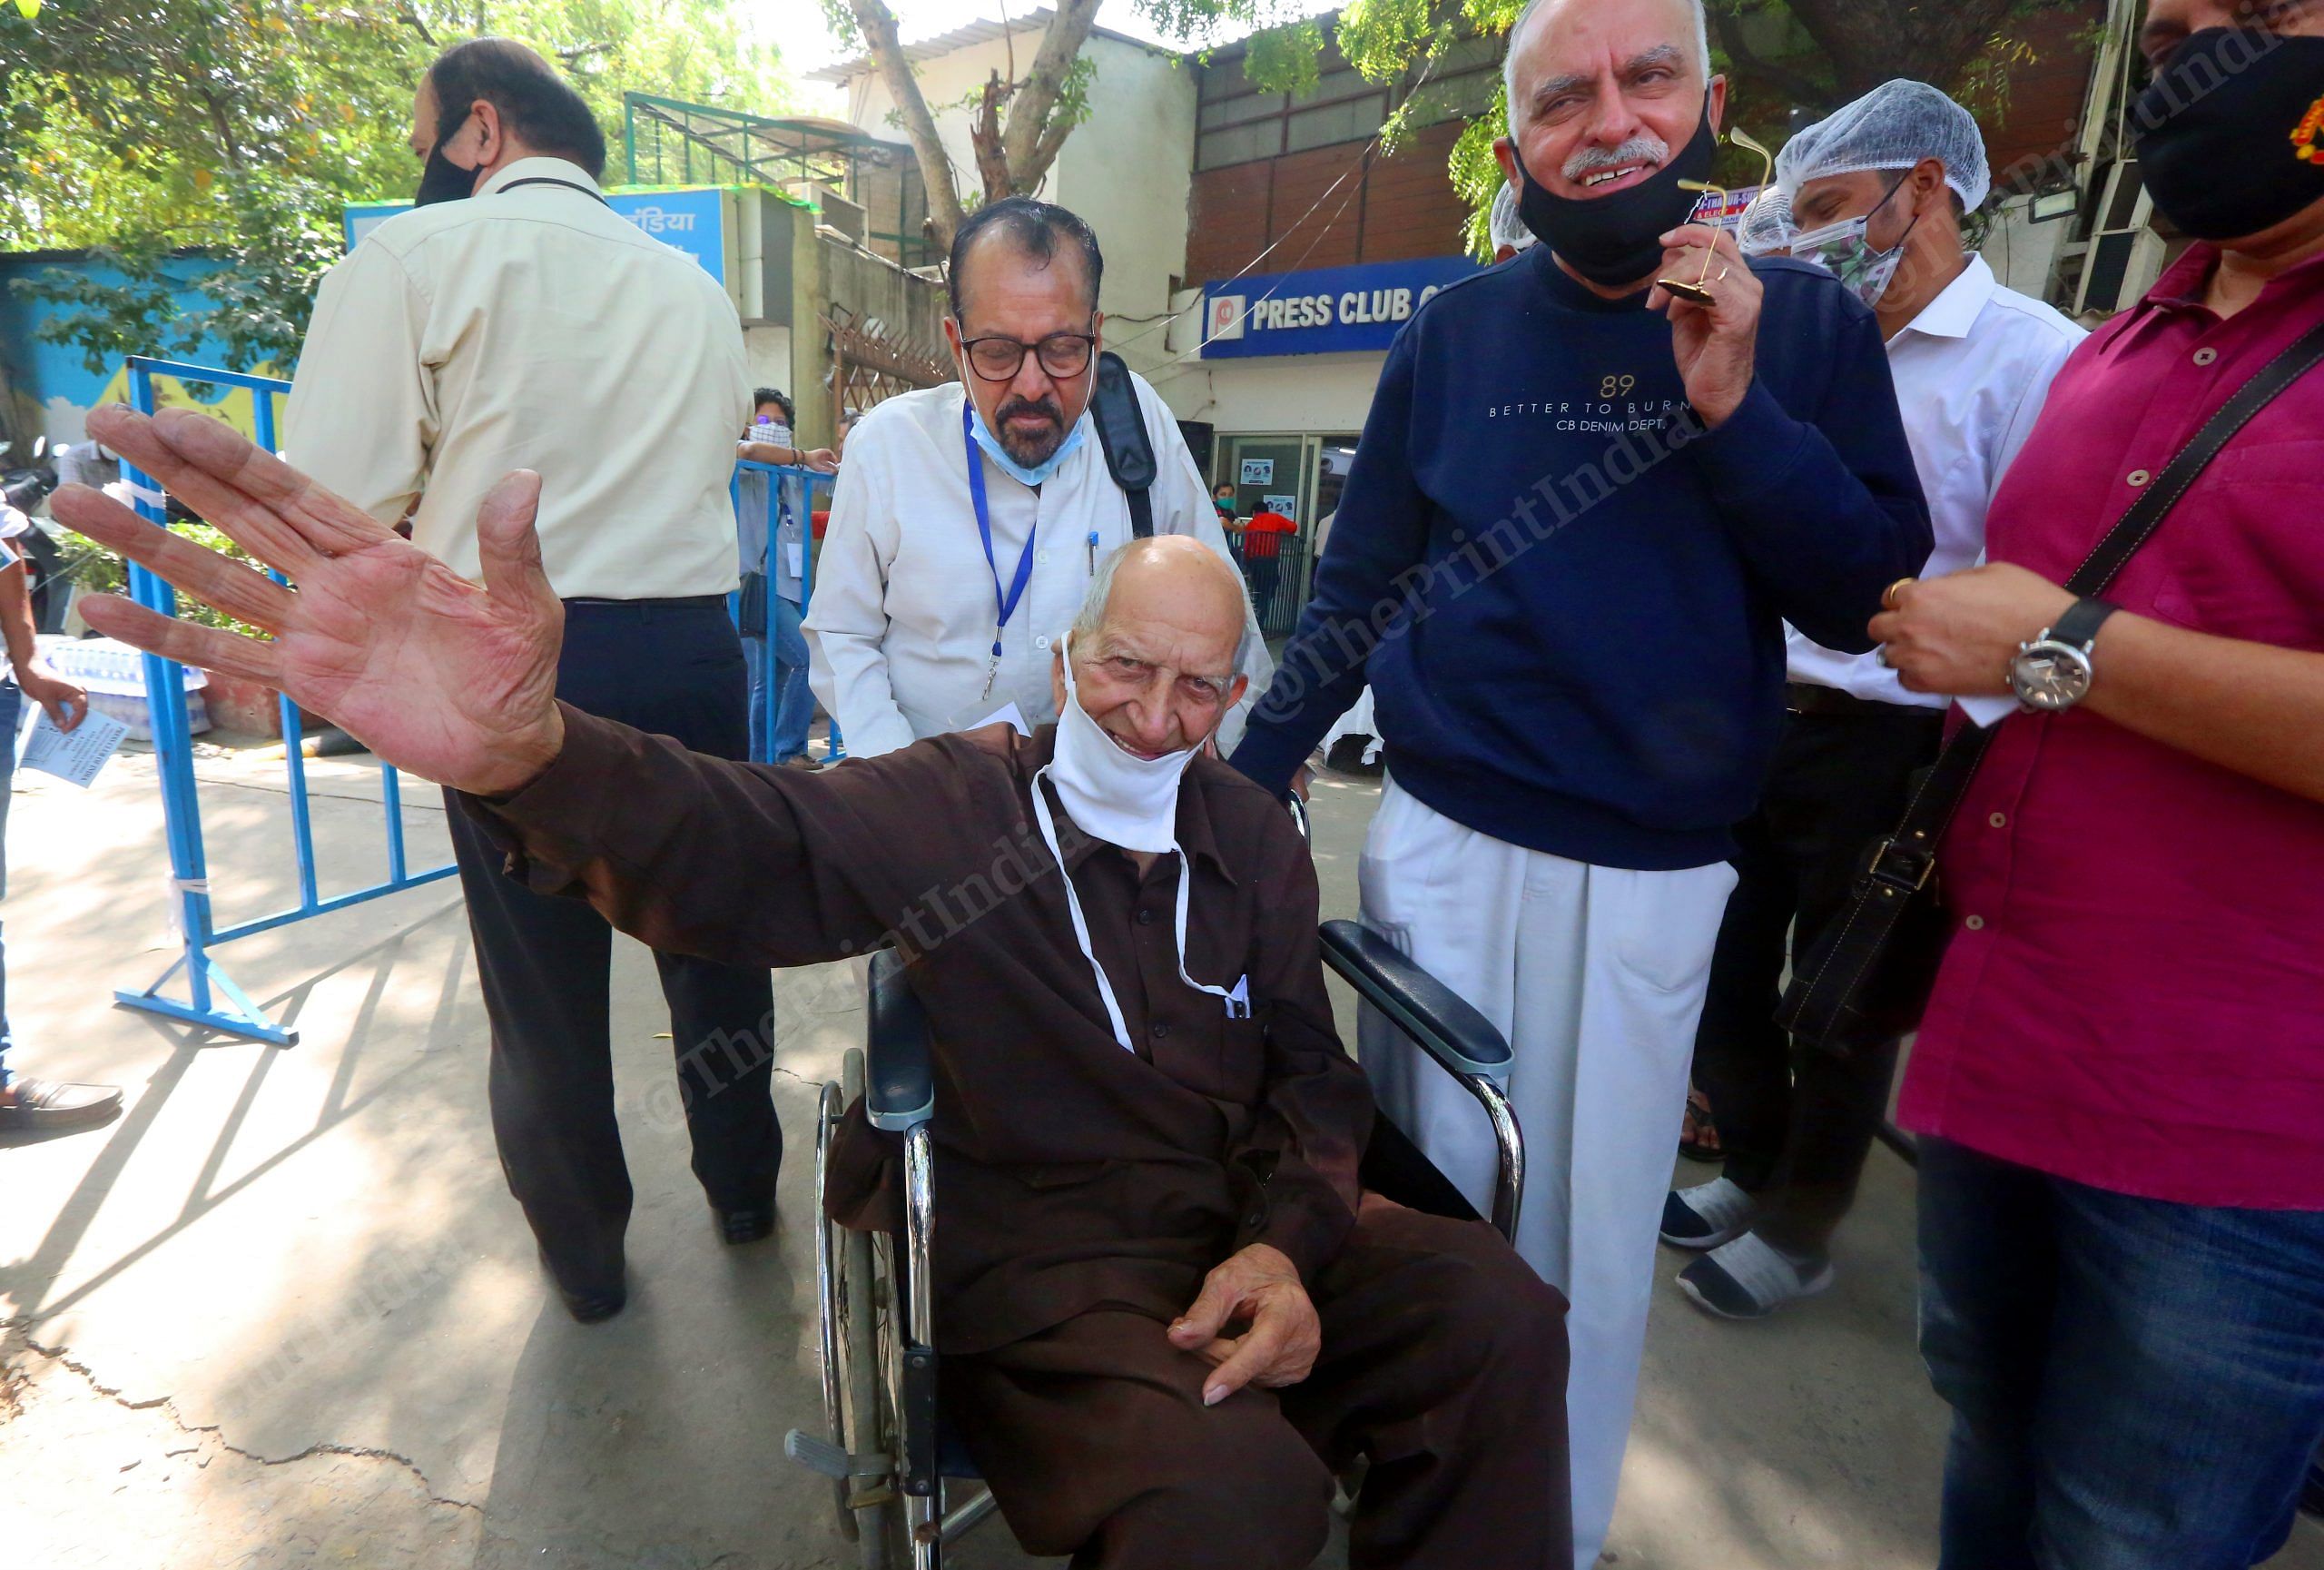 Former president of Press Club, A.R.Wig with senior journalist Anil Anand arrived on wheel chair to cast his vote| Photo: Praveen Jain | ThePrint